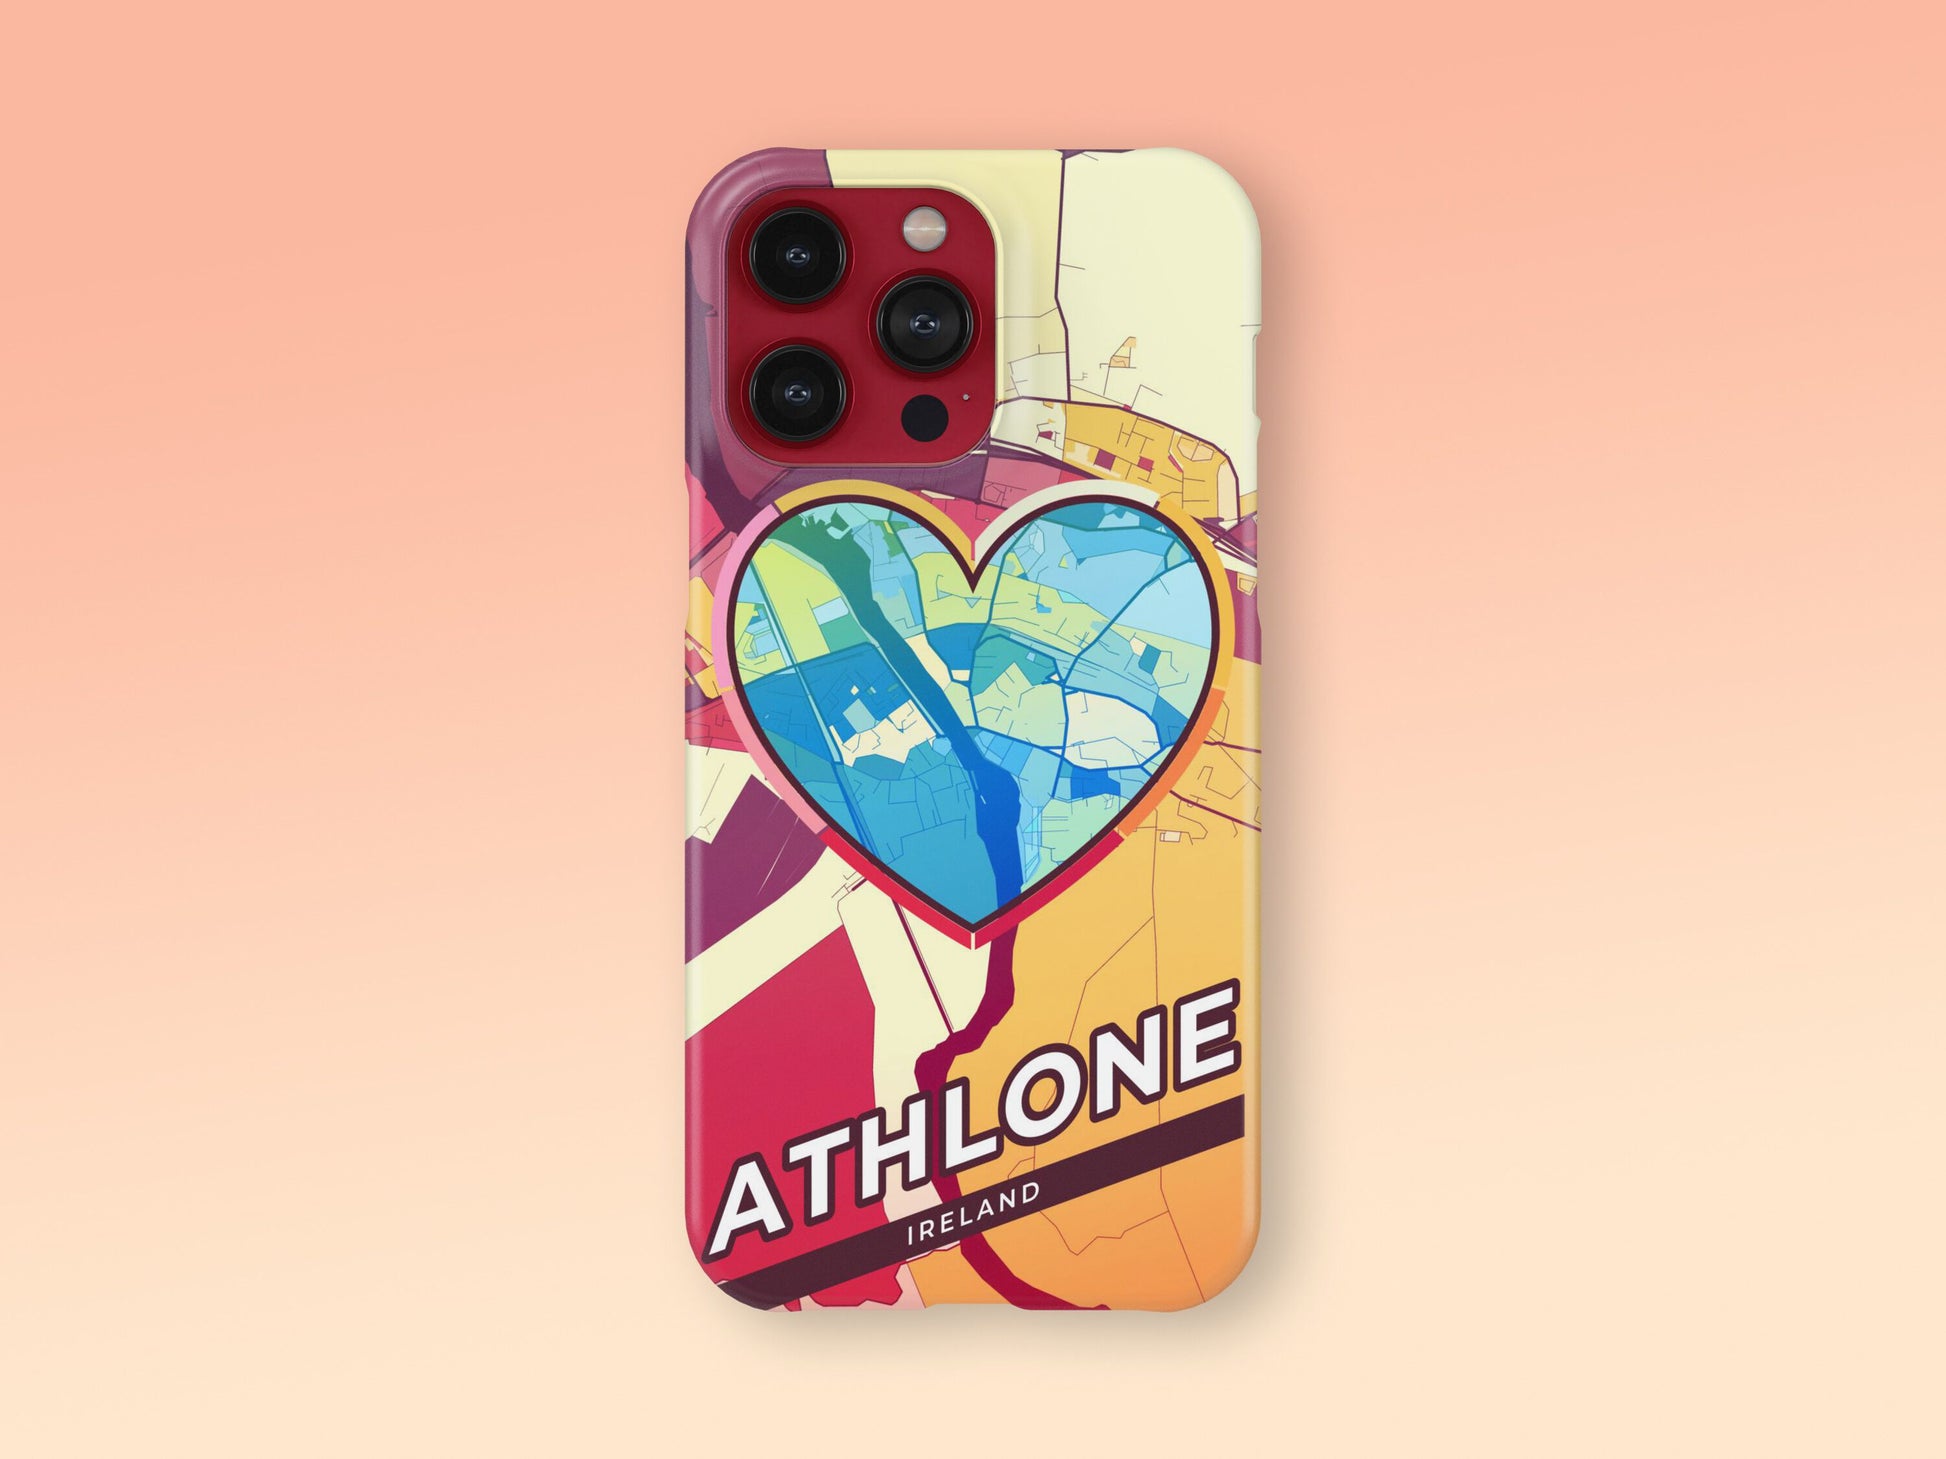 Athlone Ireland slim phone case with colorful icon. Birthday, wedding or housewarming gift. Couple match cases. 2